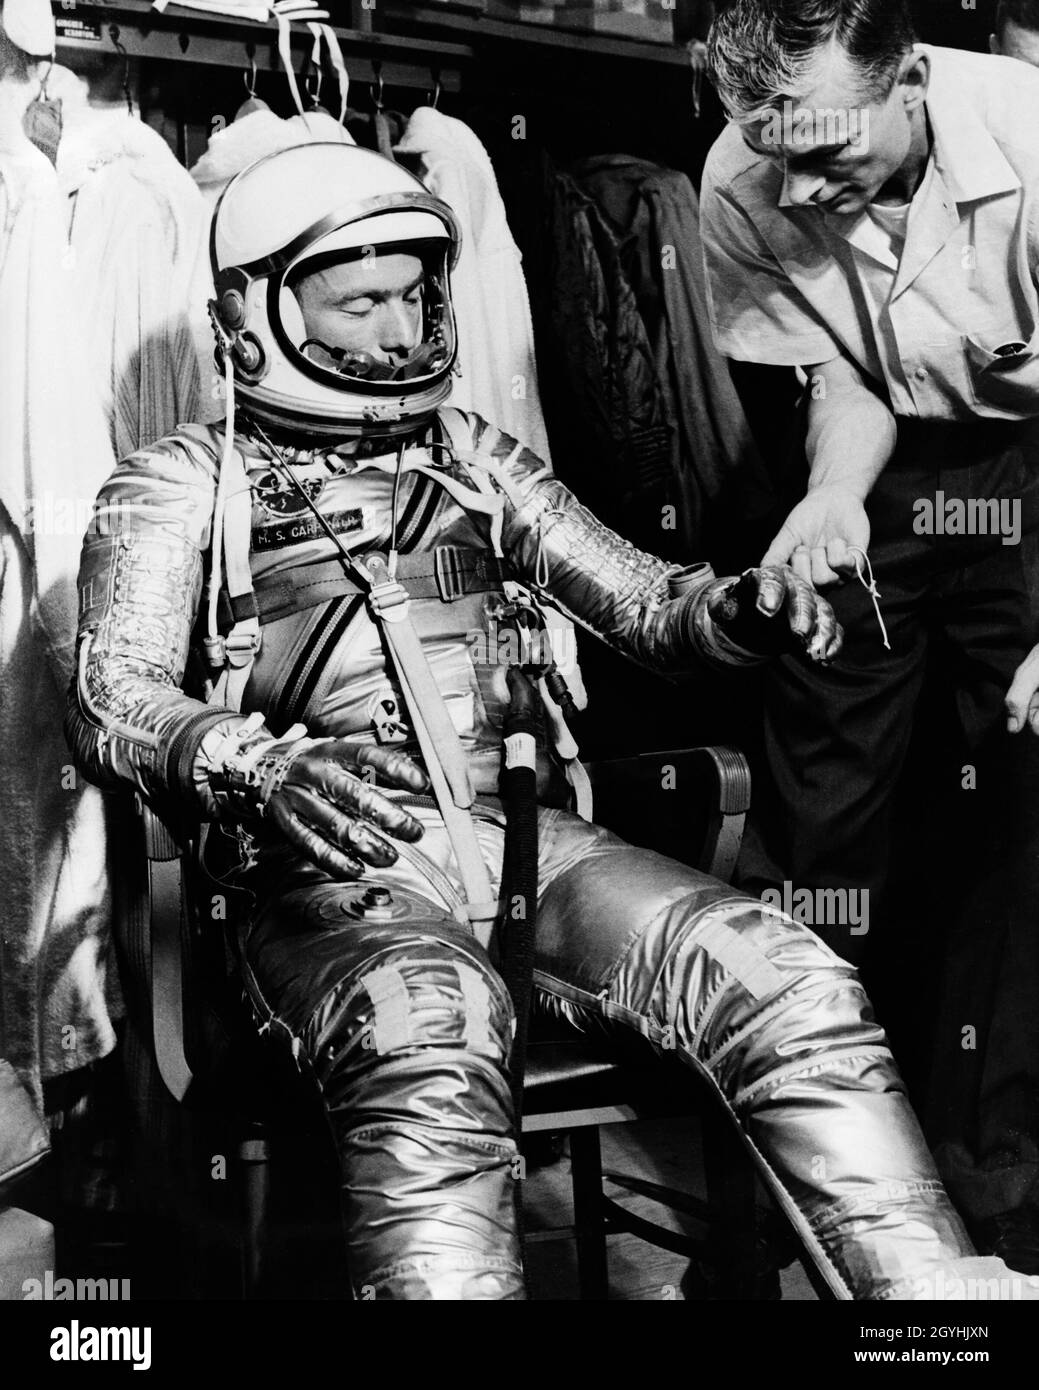 (1961) --- Mercury astronaut M. Scott Carpenter, prime pilot for the Mercury-Atlas 7 (MA-7) spaceflight, and Crew Equipment Specialist Joe Schmidt are pictured during a suiting exercise. Schmidt is seen checking the gloves on Carpenter's pressure suit. Stock Photo